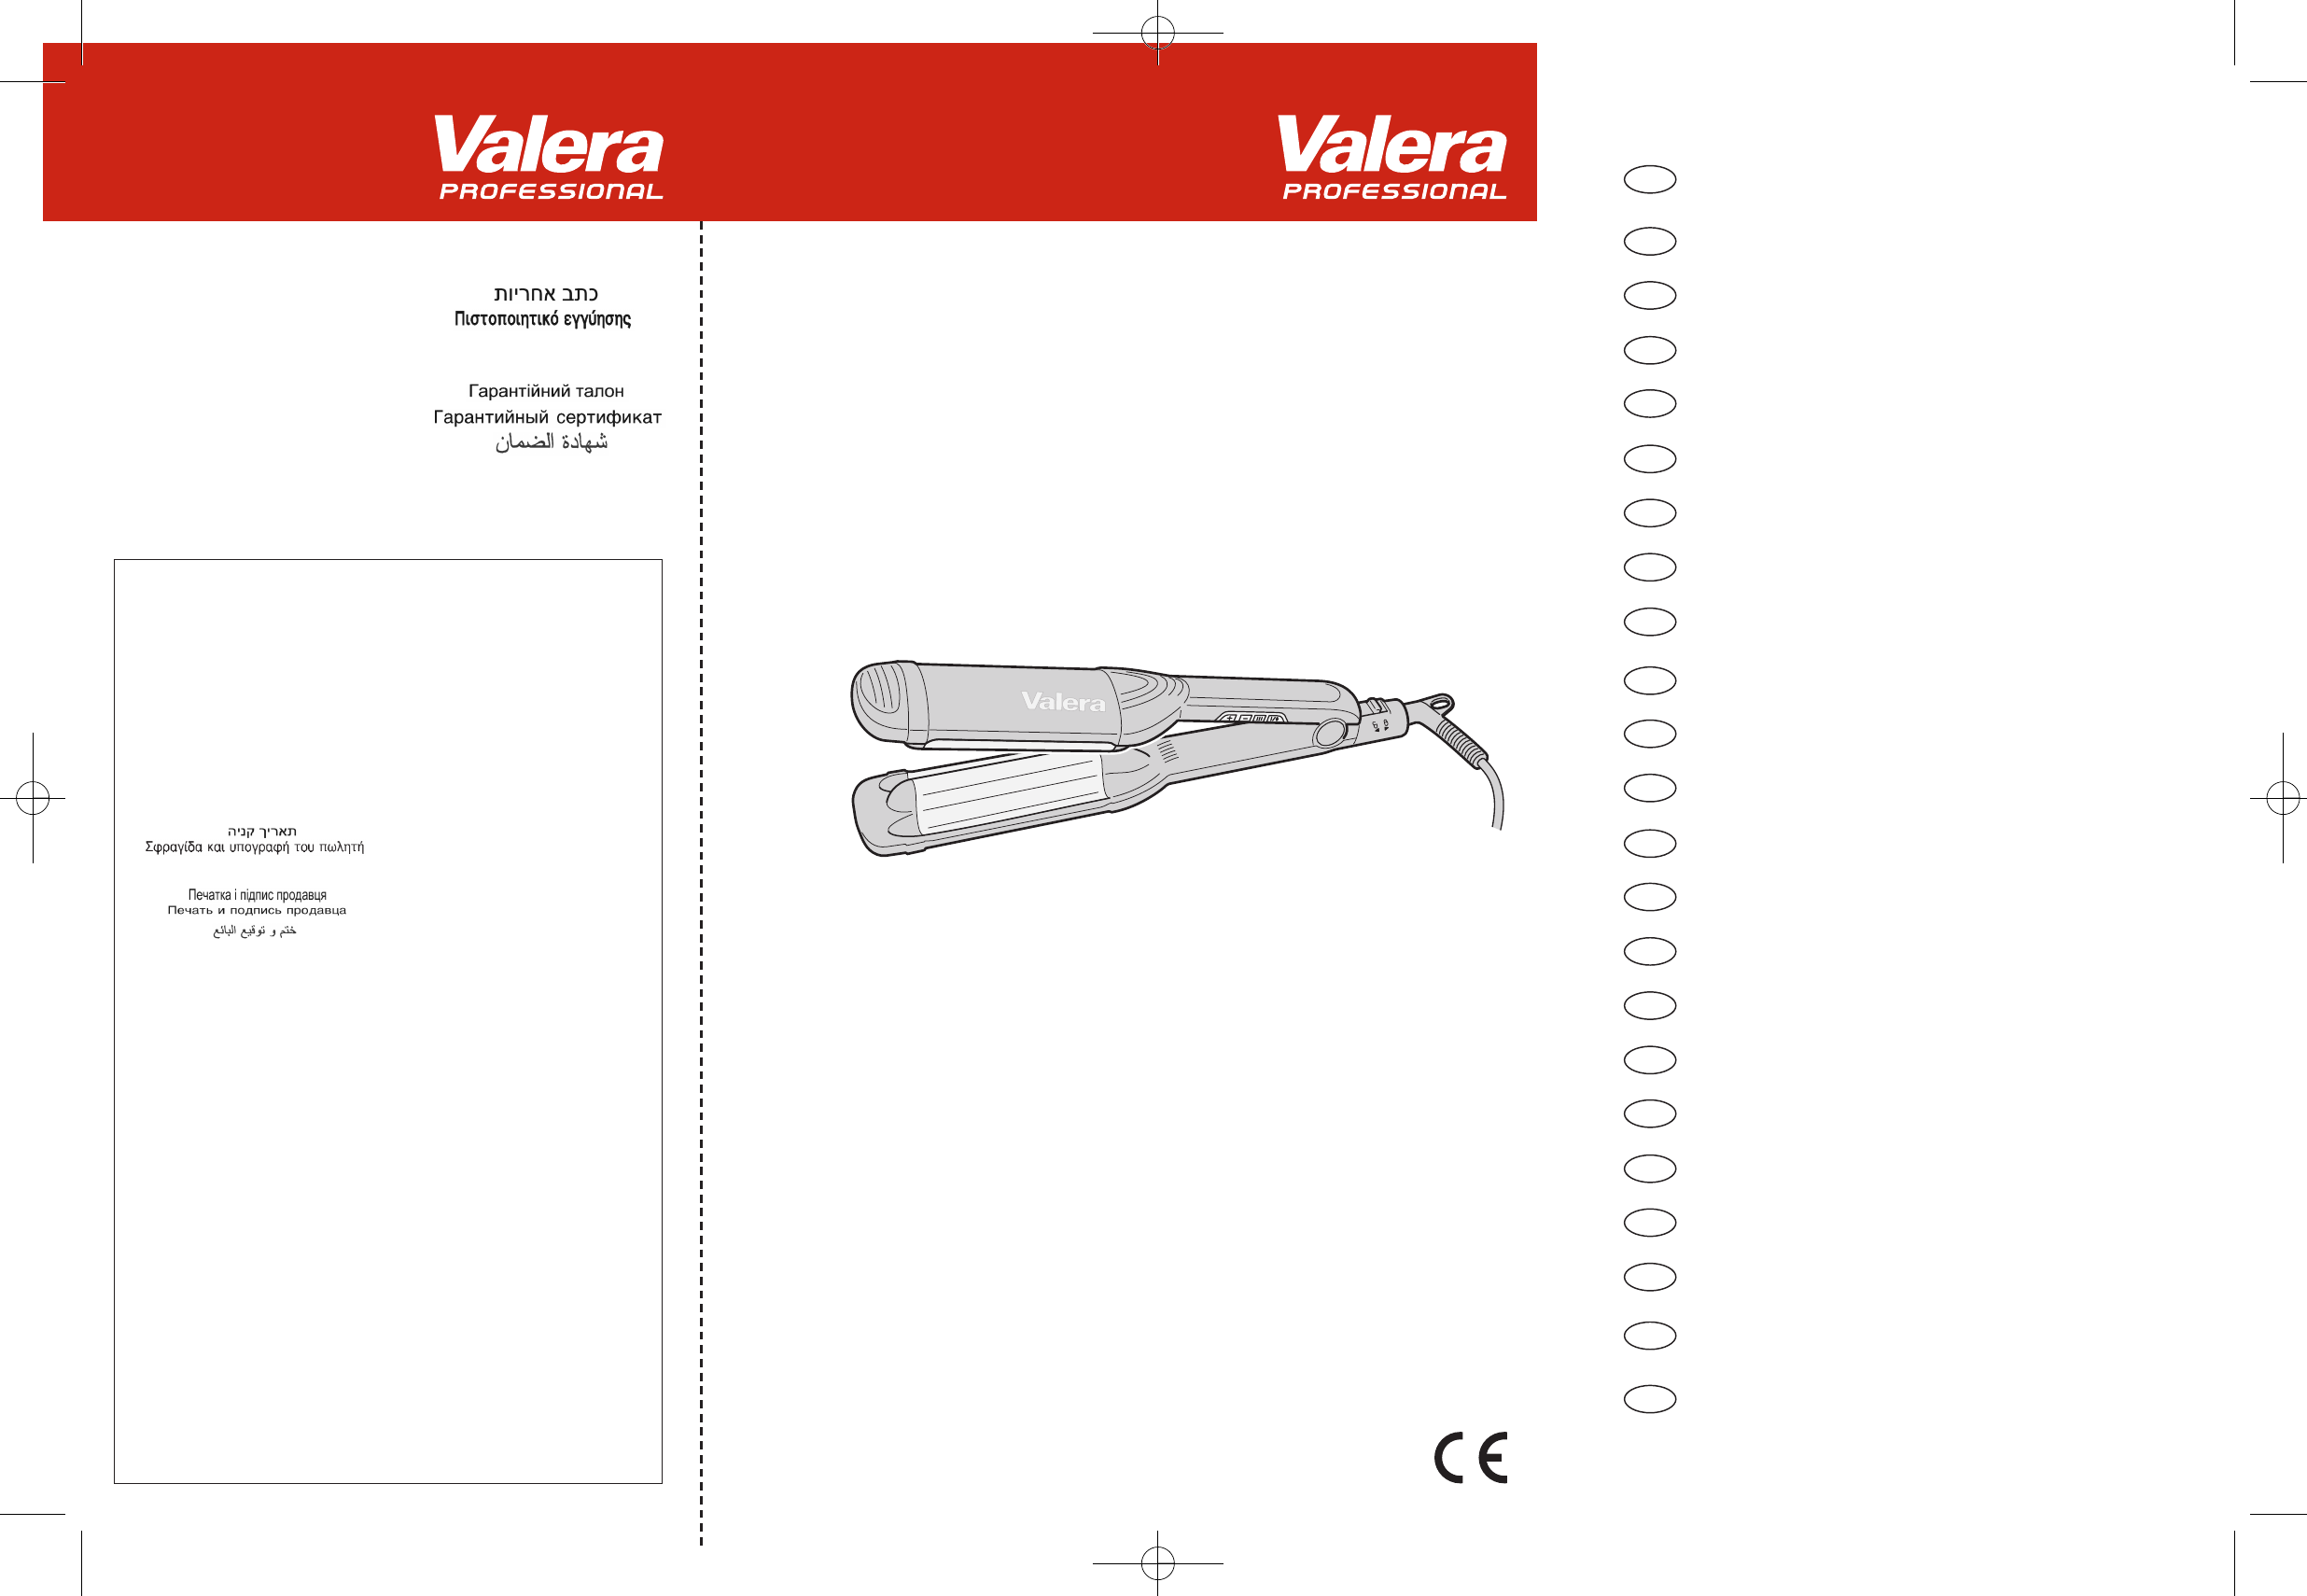 VALERA Wave Master Ionic User Manual | 94 pages | Also for: SYNTHESIS,  SILHOUETTE, SWISS'X Brush & Shine, SWISS'X Digital Ionic, SWISS'X Digital,  SWISS'X Logica, SWISS'X IDEAL, CONIX, IONIC MULTISTYLE PROFESSIONAL,  DIGICURL,